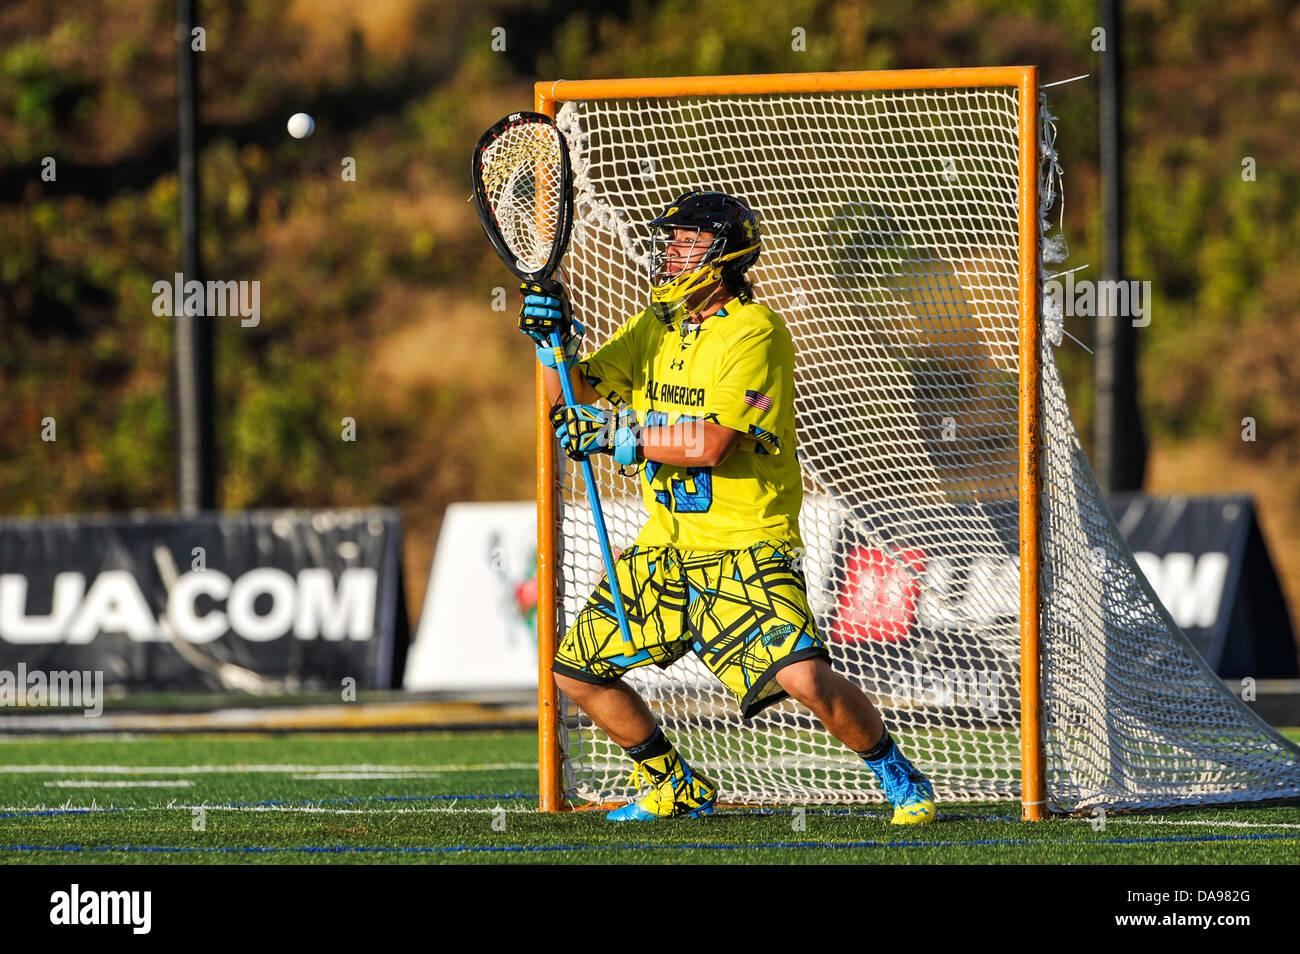 July 6, 2013 - Baltimore, MD, United States of America - July 6, 2013 Baltimore, MD.South All-Star goalie Dan Morris #23 defends a shot on goal during the 8th Annual Under Armour All-American Lacrosse Classic at Johnny Unitas Stadium Baltimore on July 6, 2013..South defeats North 28-24. Stock Photo